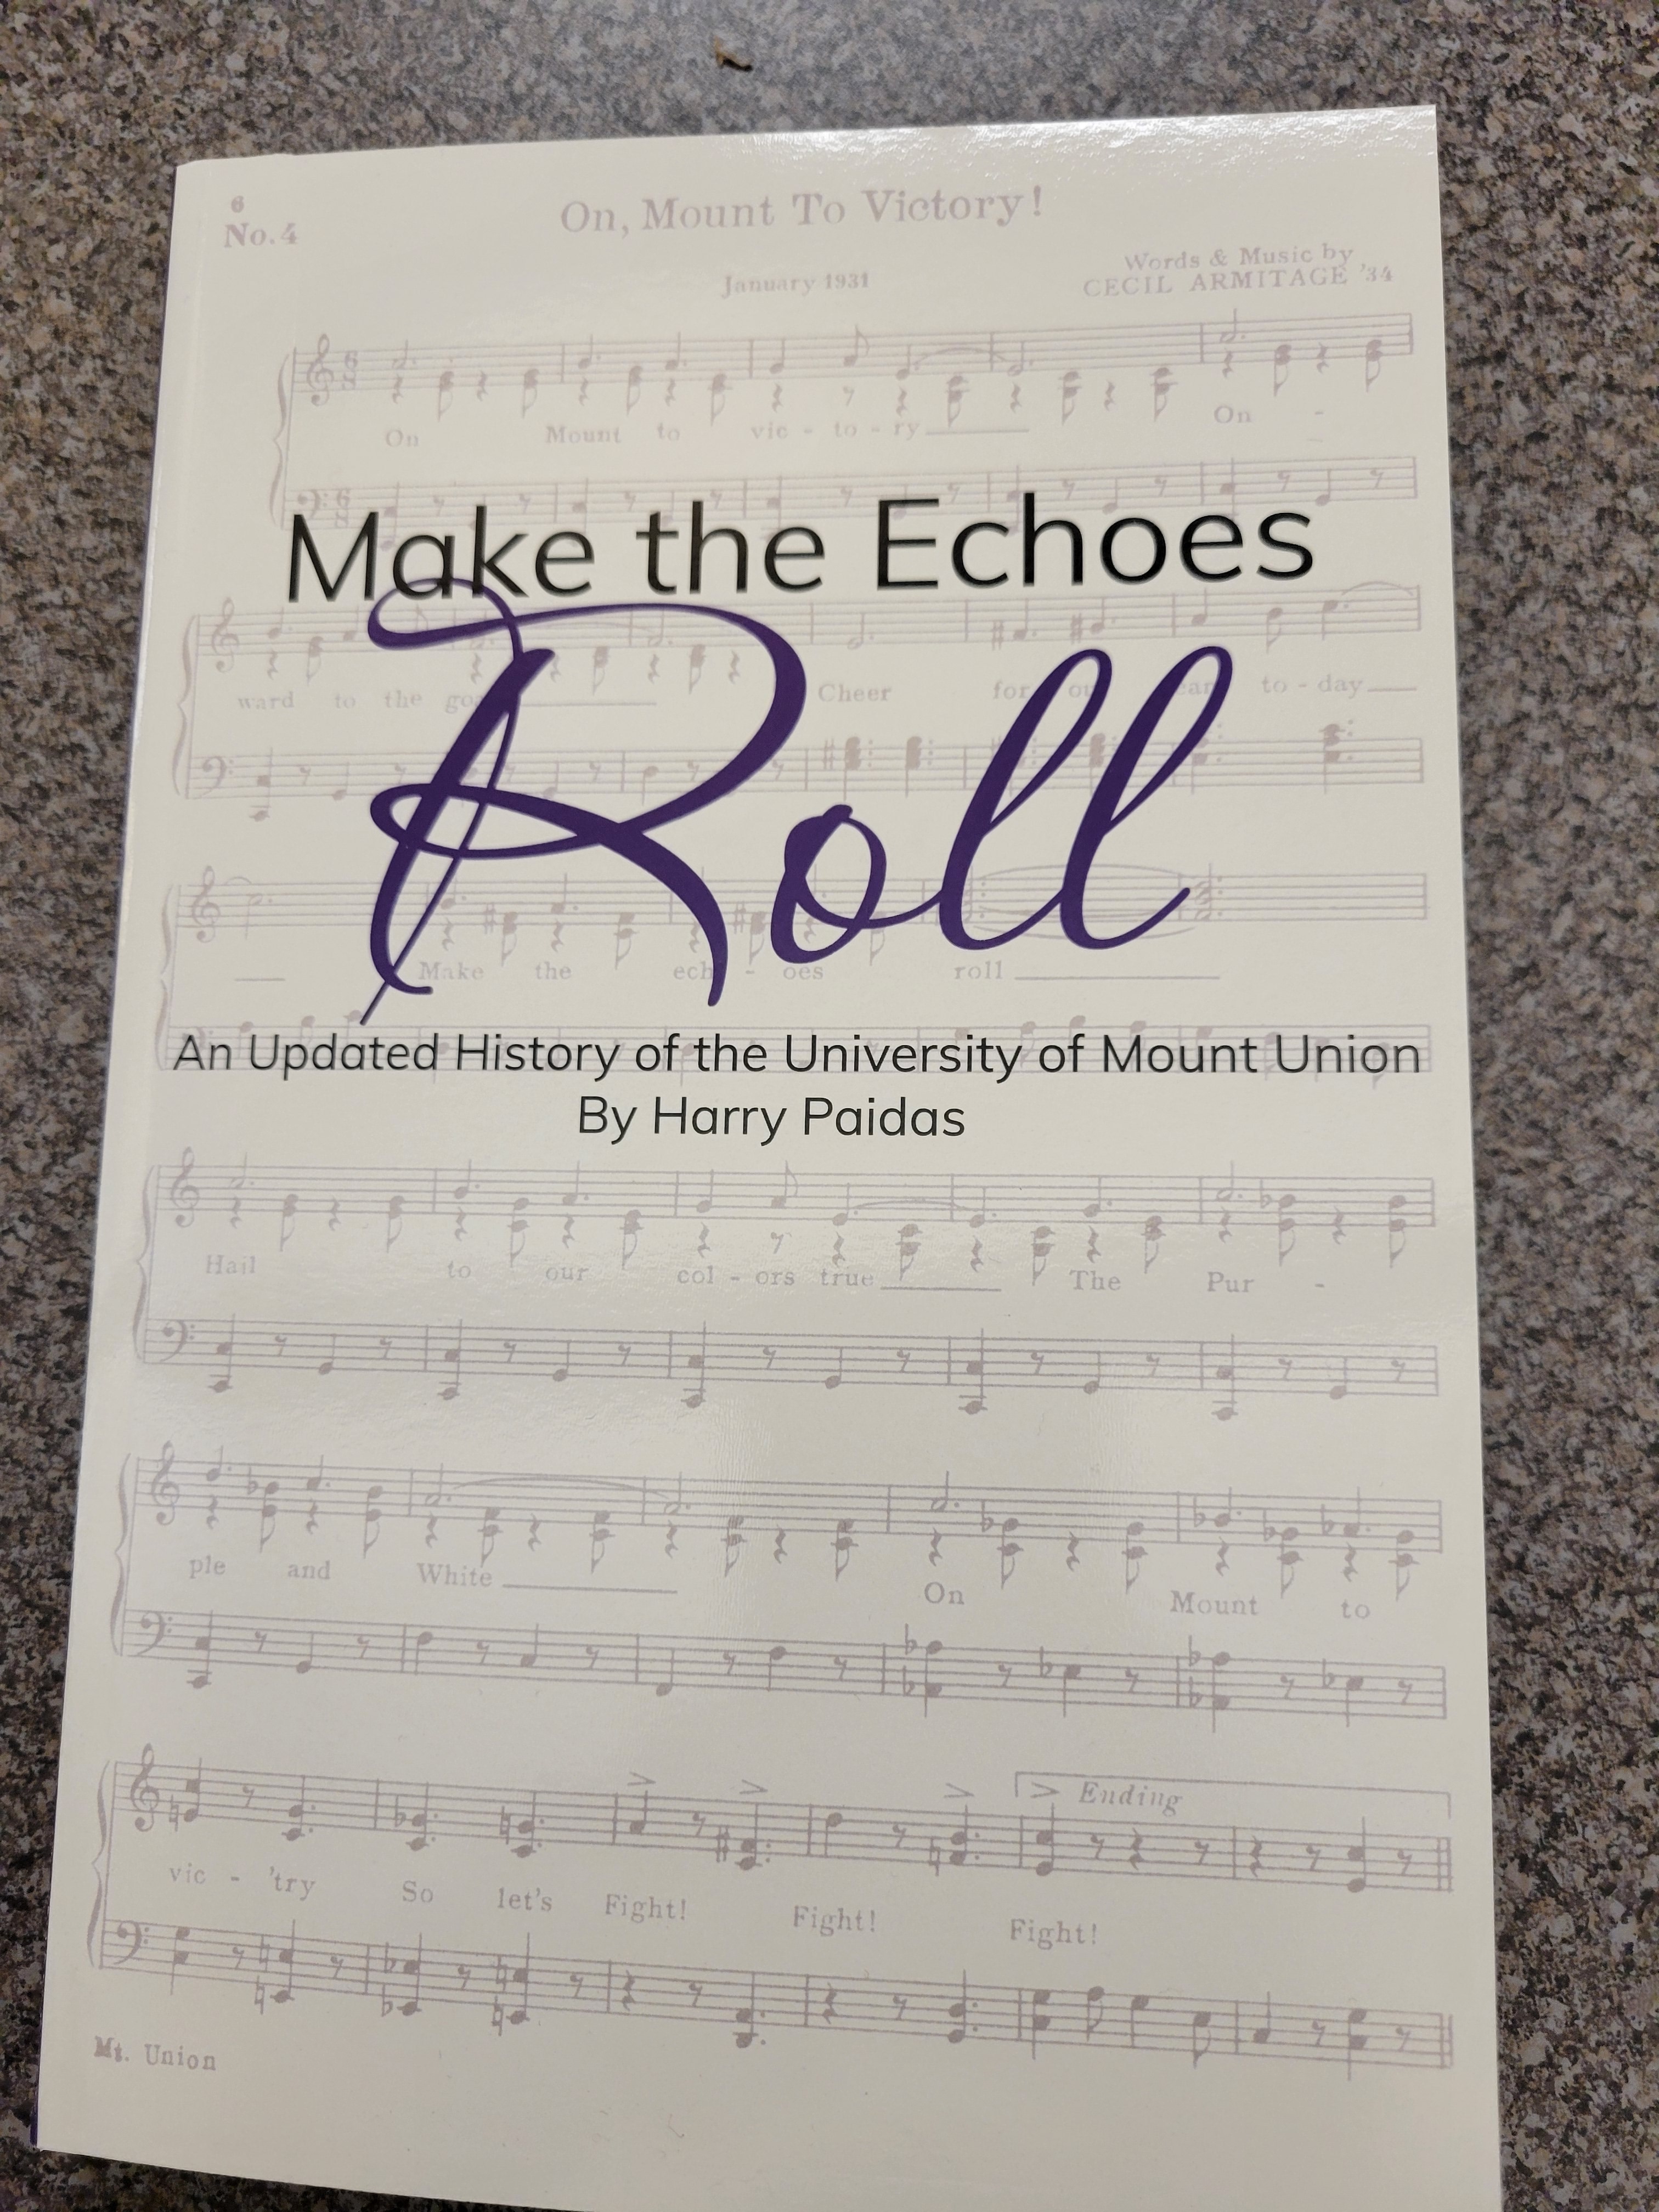 Make the Echoes Roll